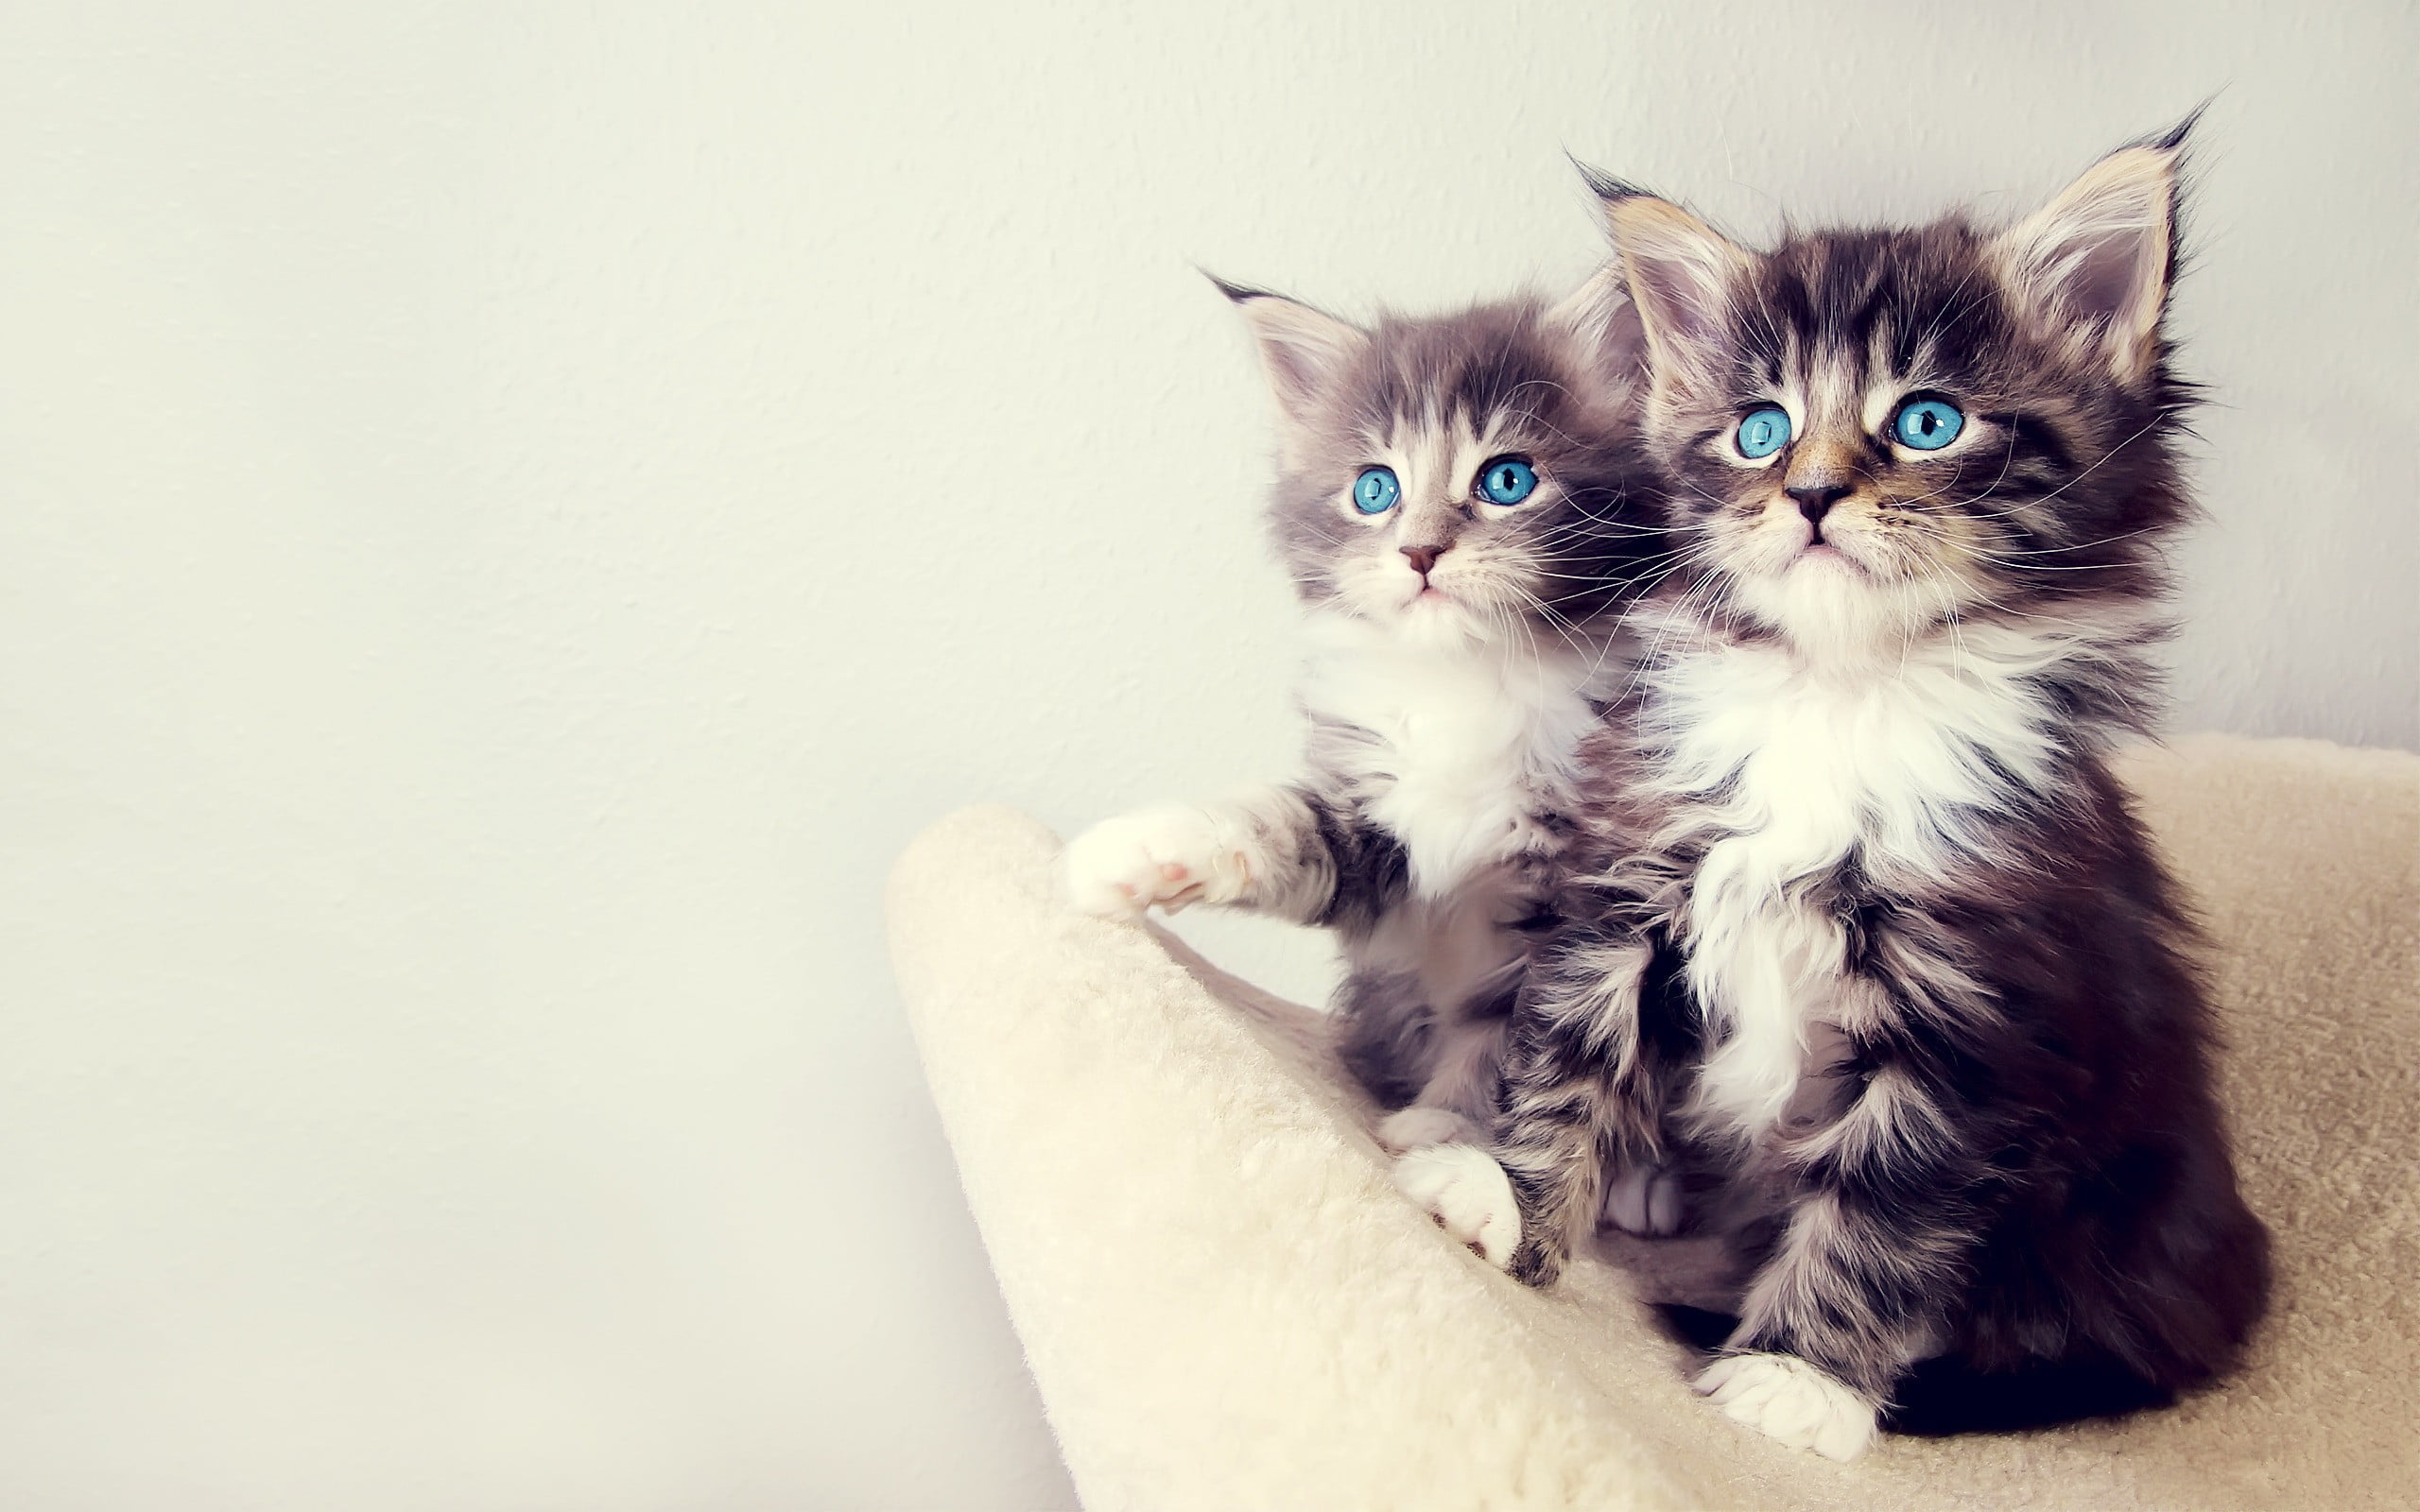 two short-haired gray kittens, cat, blue eyes, animals, pets